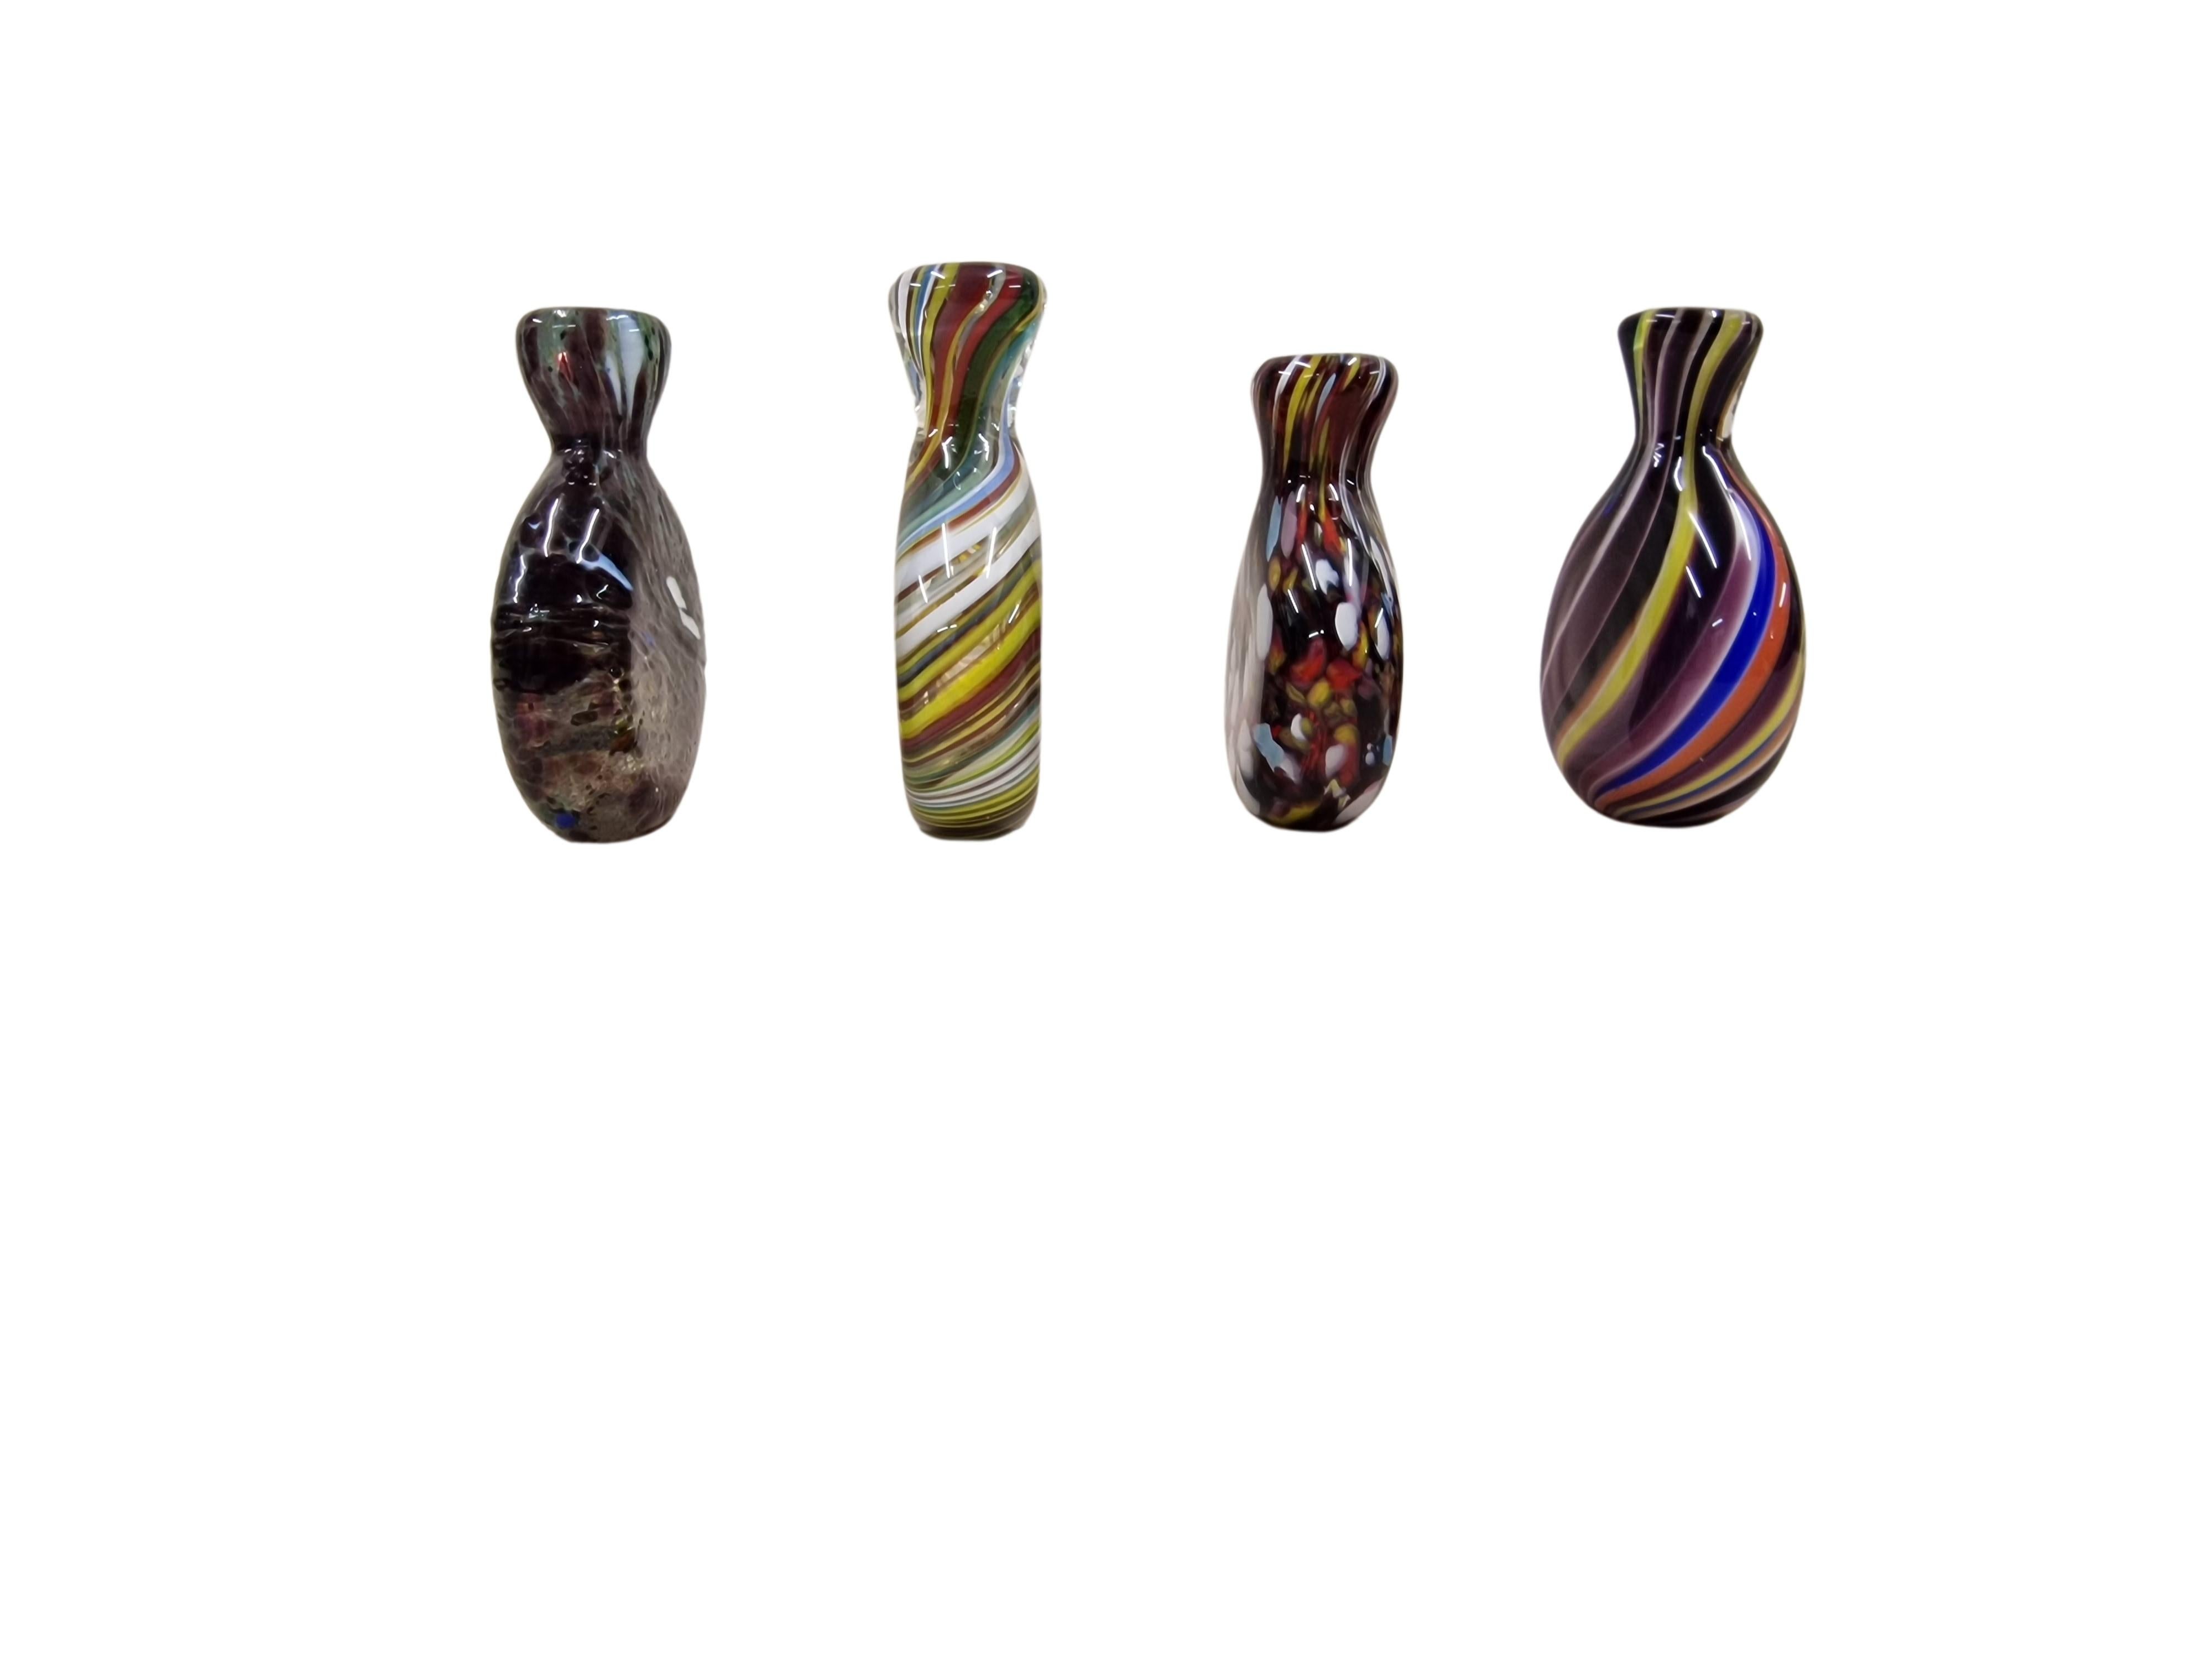 Set of four glass snuff bottles, very rare from the 1960s/70s, made of one of the glassworks - probably Joska Kristall, in the Bohemian Forest, Germany.

These are collection items that were made to a masterful quality, which is even today a very